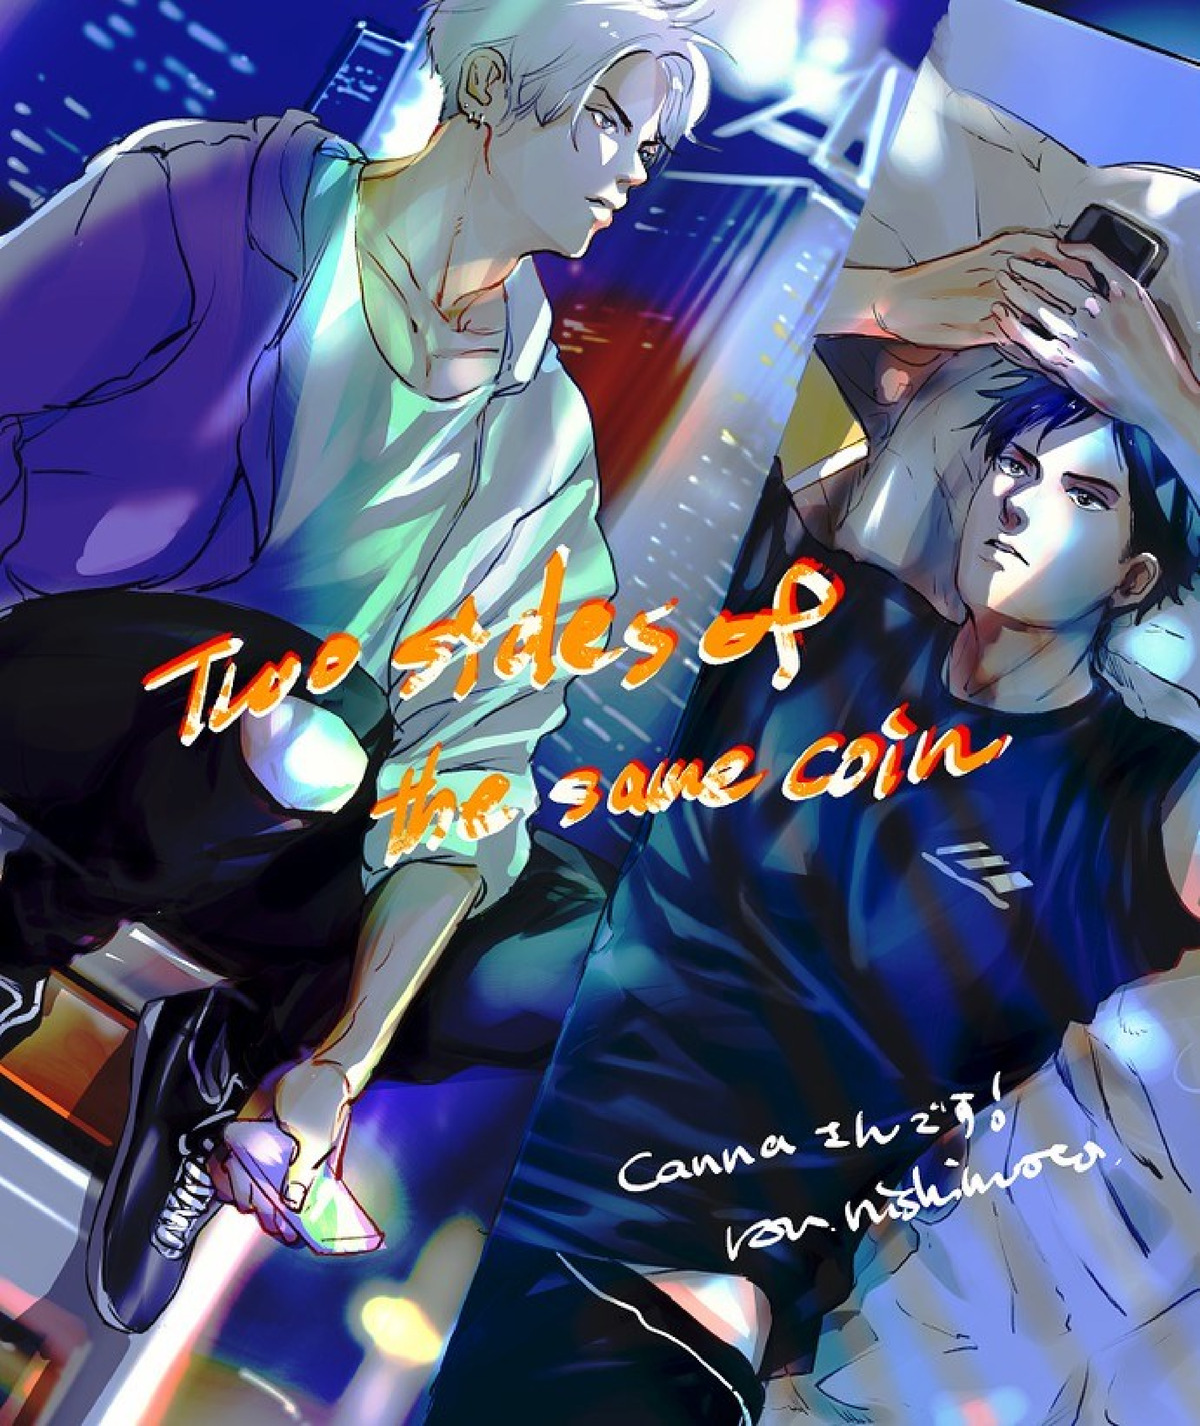 【Two sides of the same coin[腐漫]】漫画-（上卷01-02）章节漫画下拉式图片-58.jpg